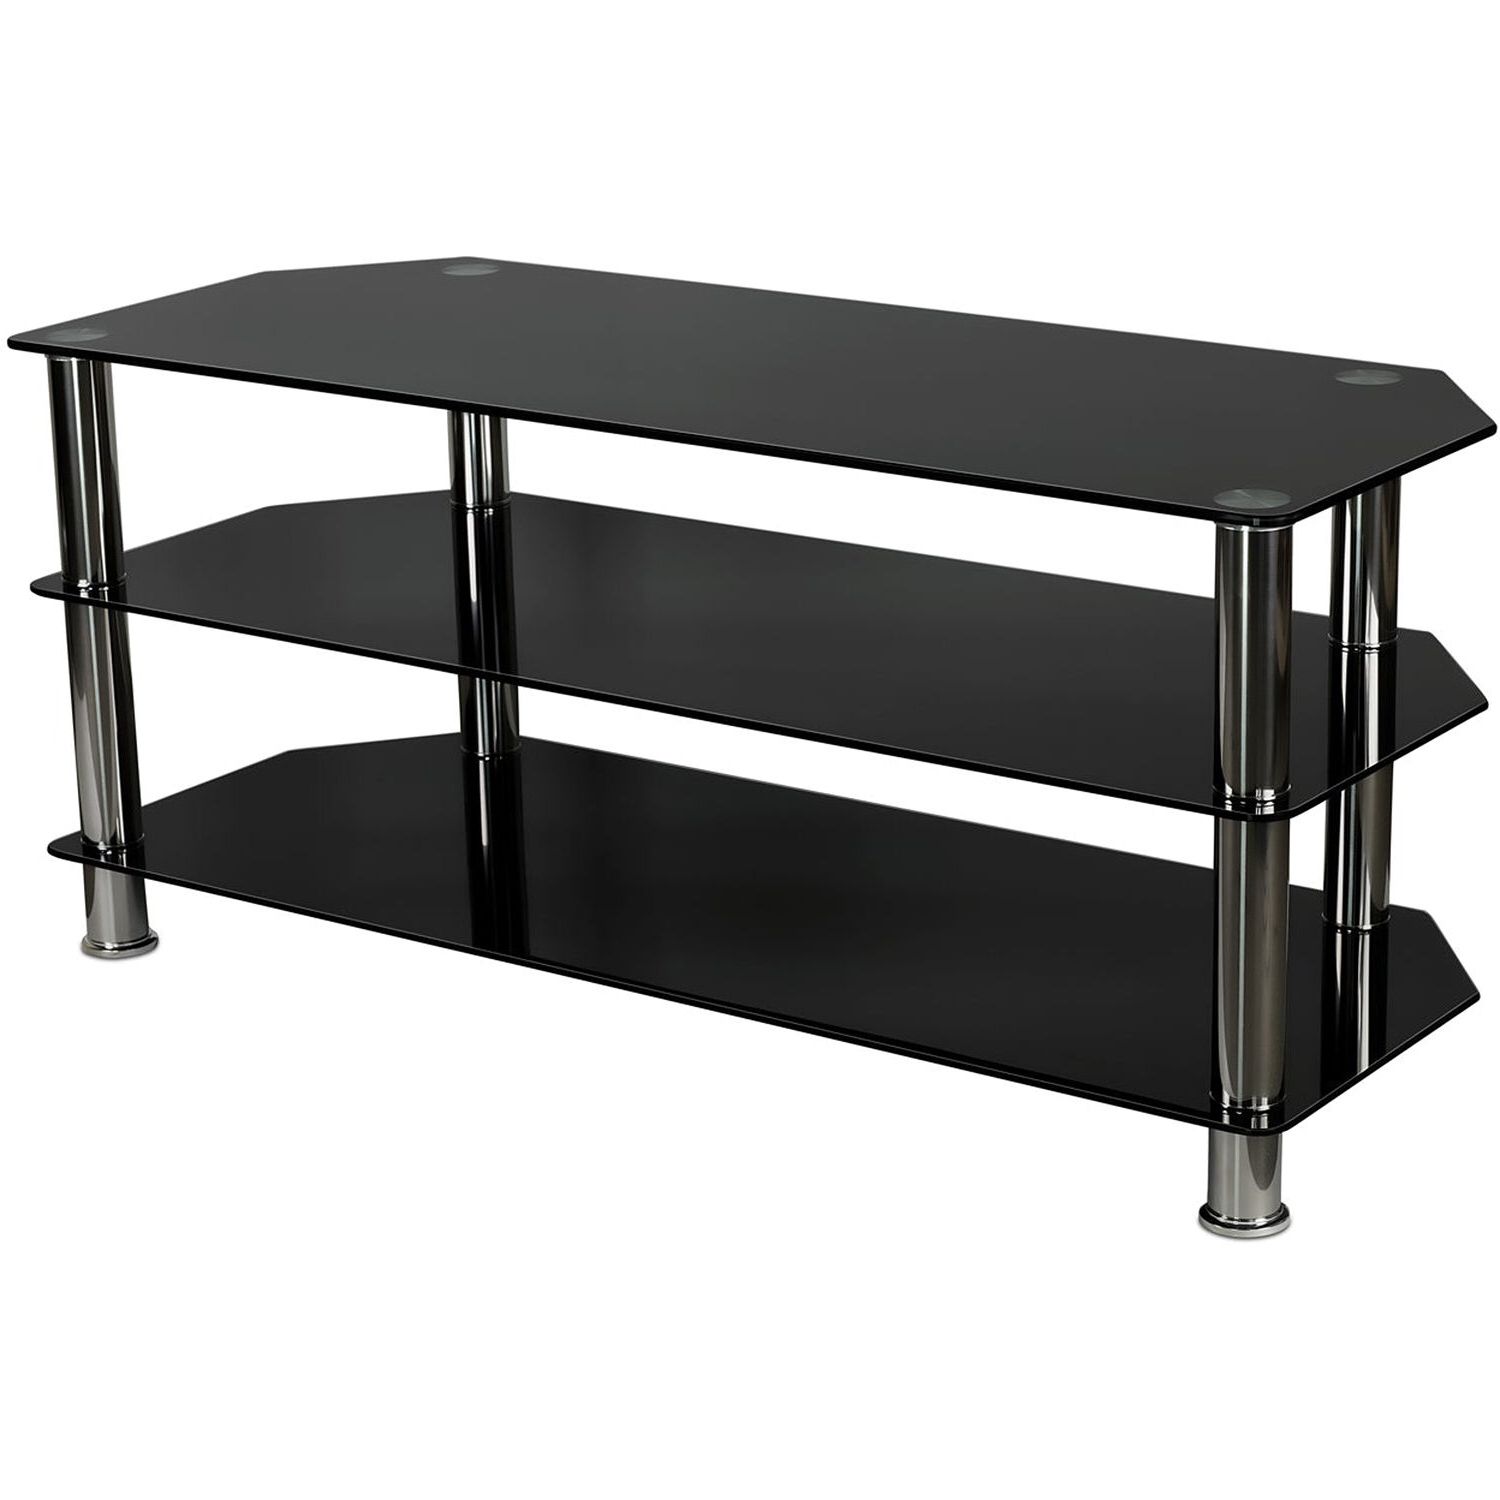 Popular Tempered Glass Tv Stands In Mount It! 3 Tiered Tempered Glass Tv Stand For Flat Screen (View 6 of 10)